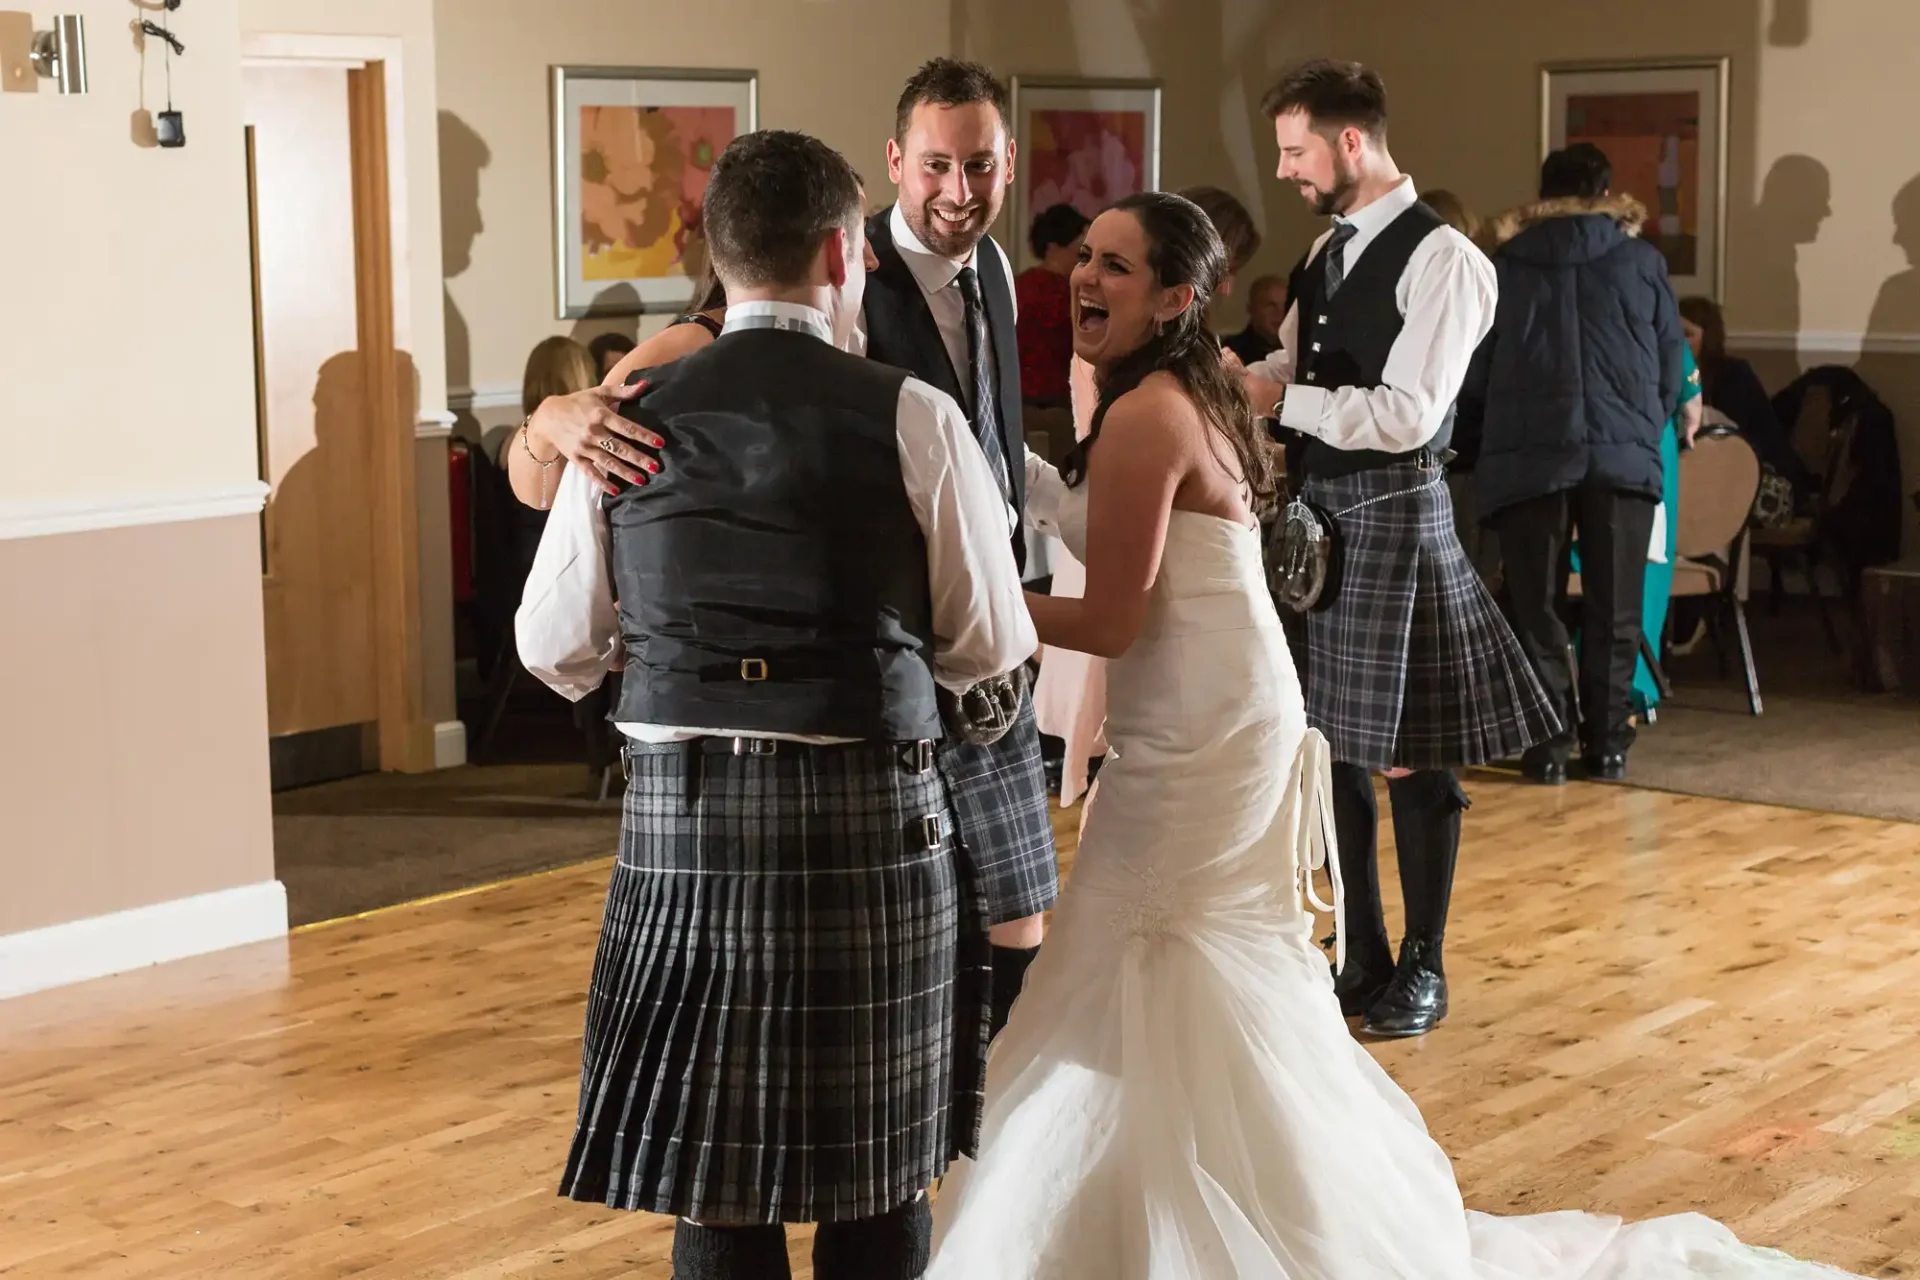 A bride in a white dress laughs joyously while dancing with a groom and another man, all wearing kilts, at a festive indoor event.